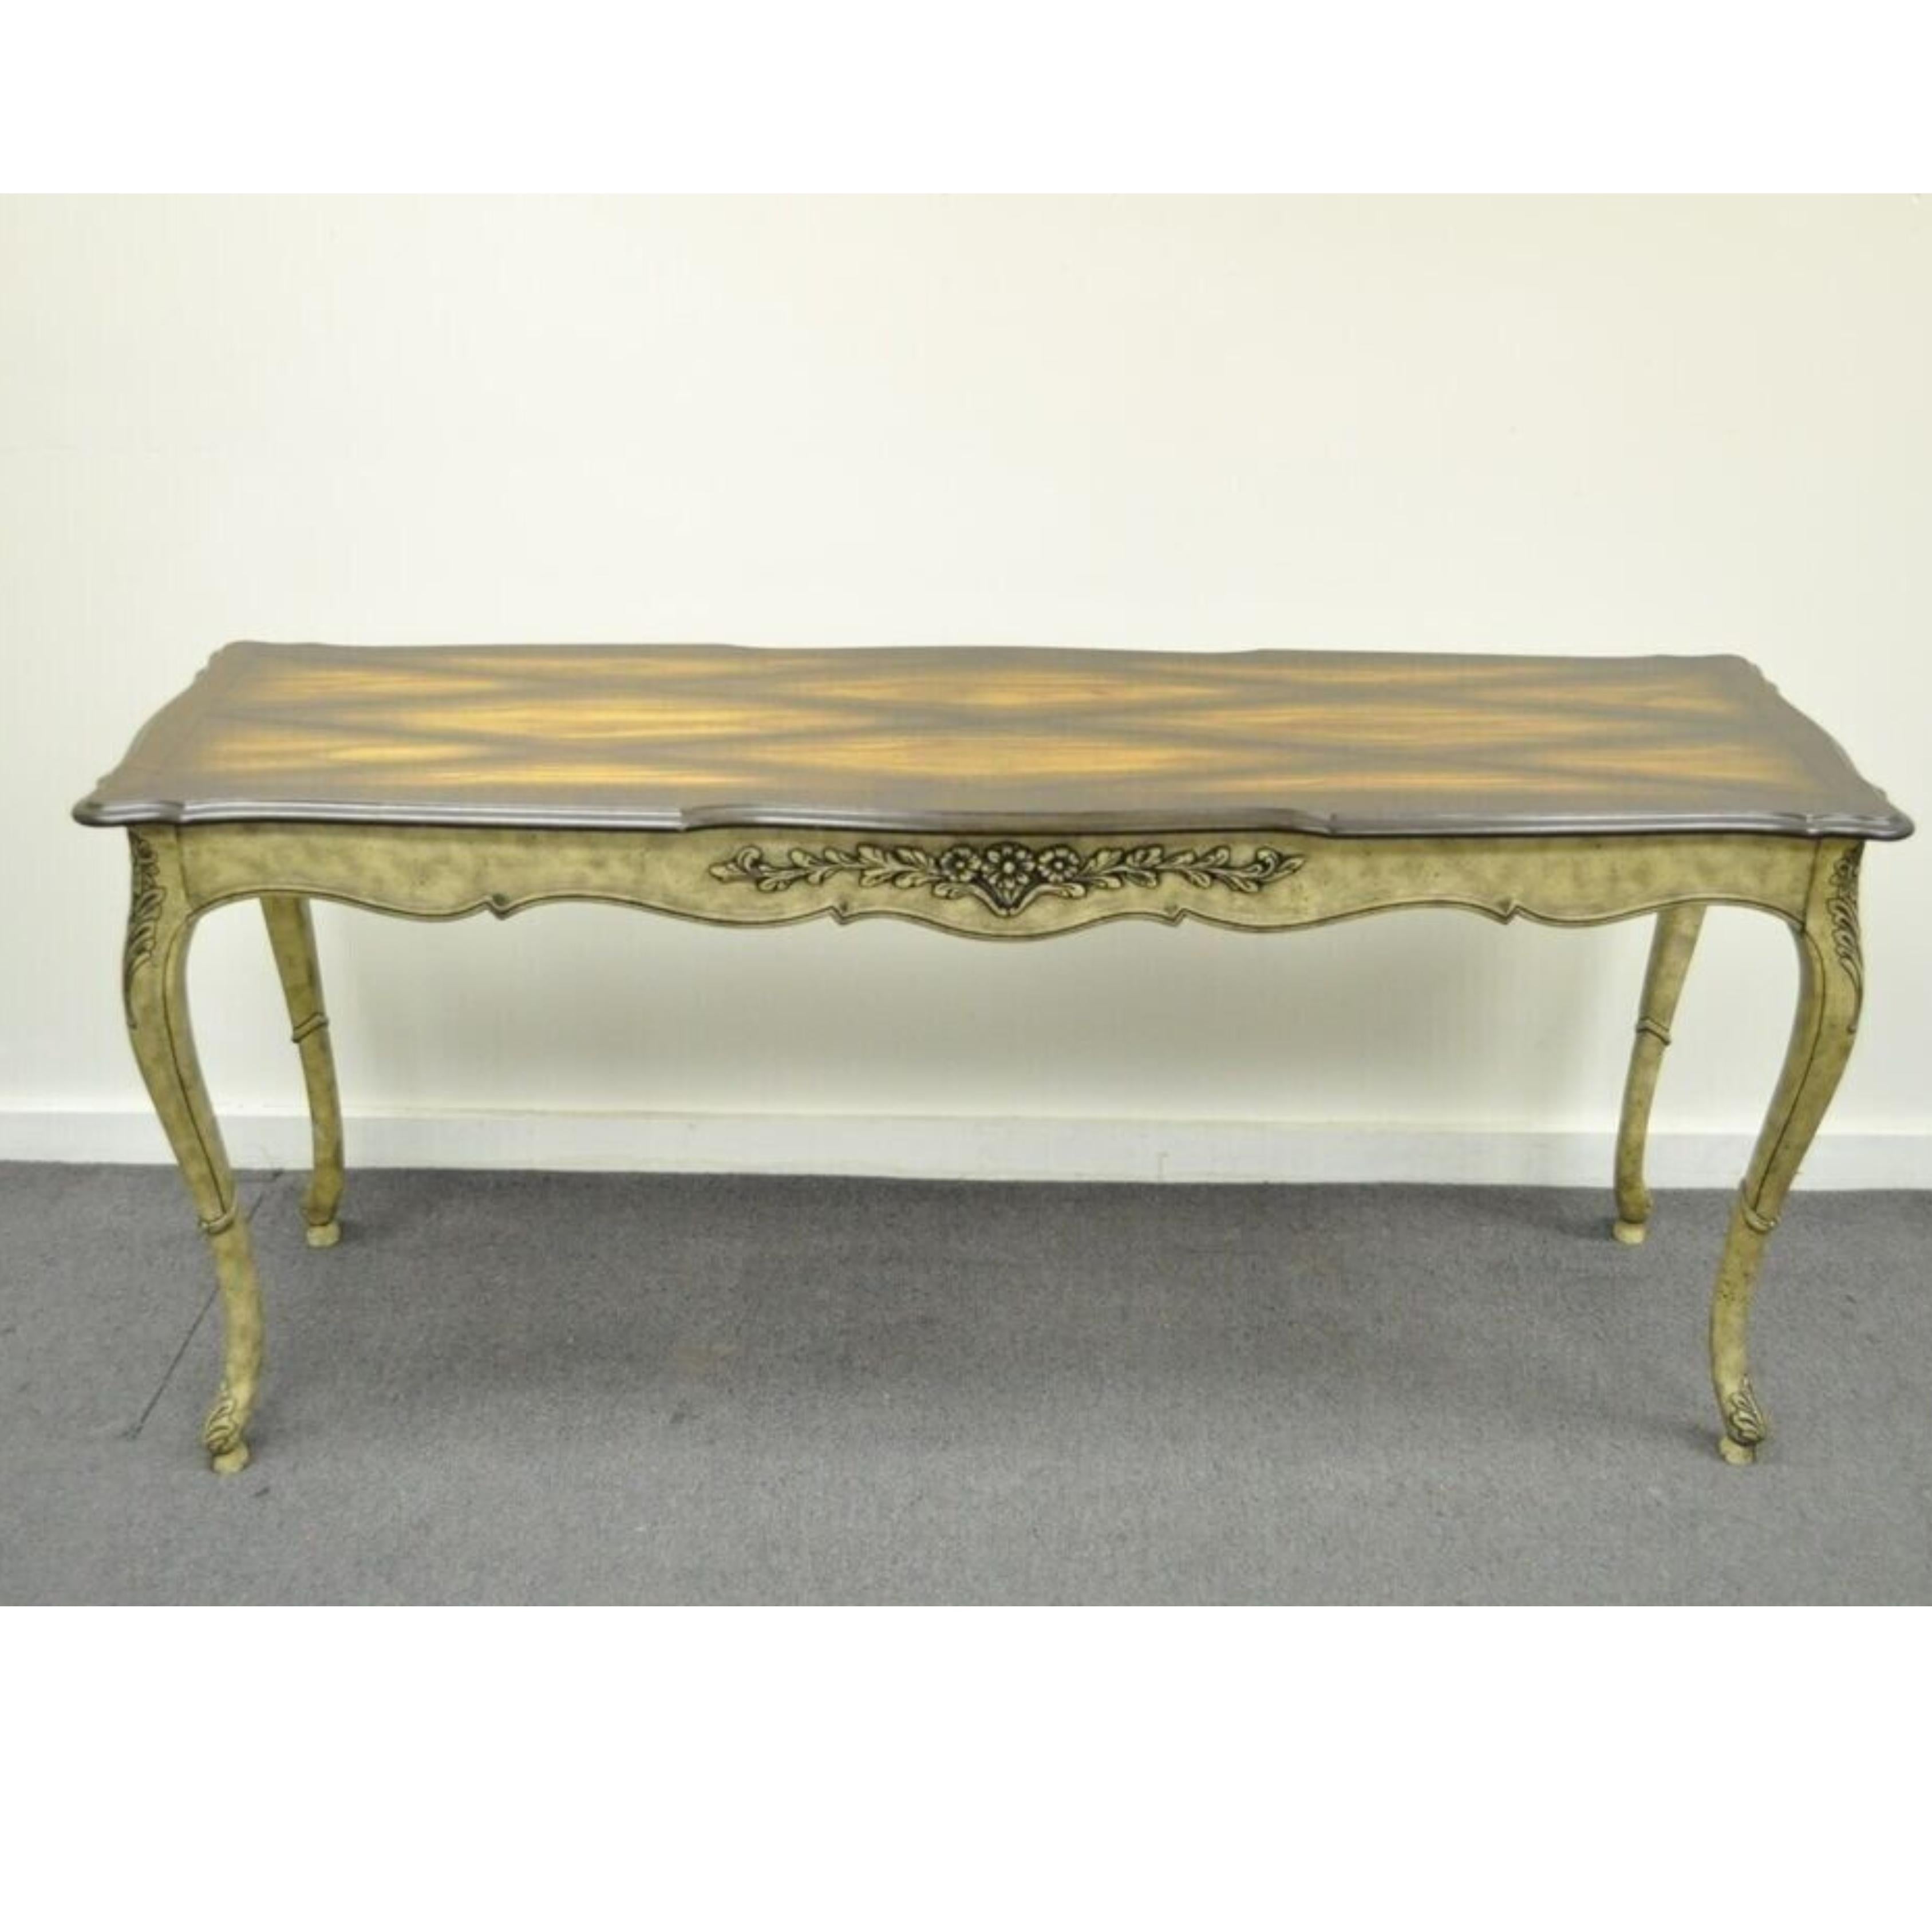 Vintage French Country Louis XV Style Console Hall Table and Pair Stool Benches - 3 Pc Set. Item features a distressed finish, scalloped parquetry table top with natural wood grain. Table and stools features beautiful cabriole legs with hoof feet